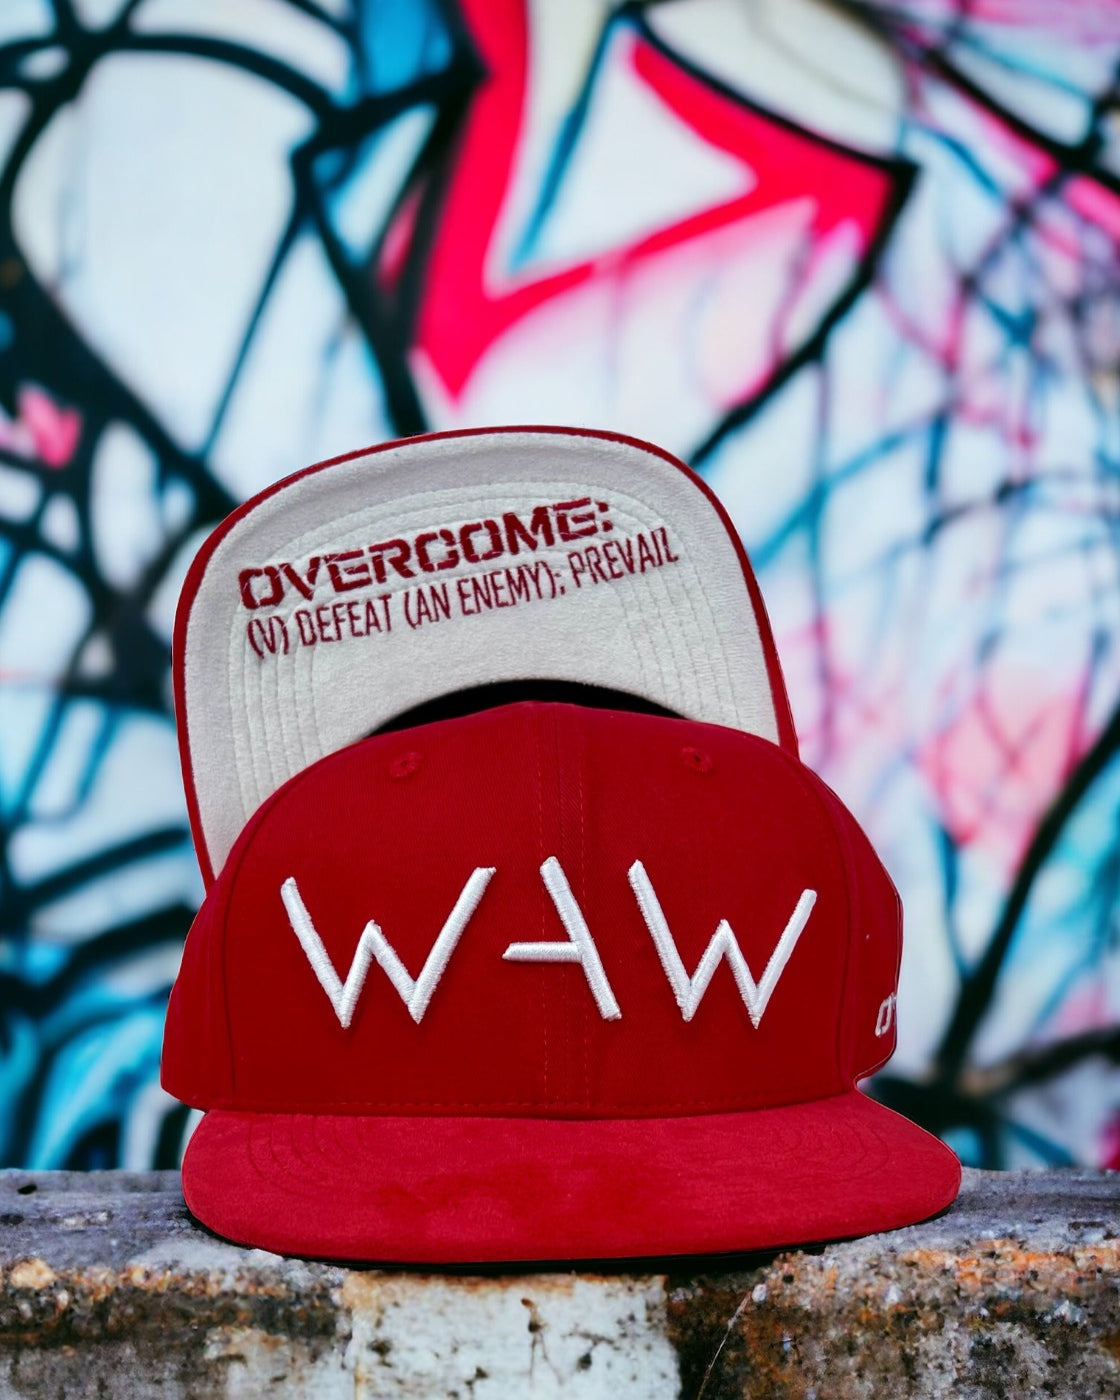 Rose Red Hat with suede bill, WAW logo and overcome message, WeAreWarriorsApparel.com